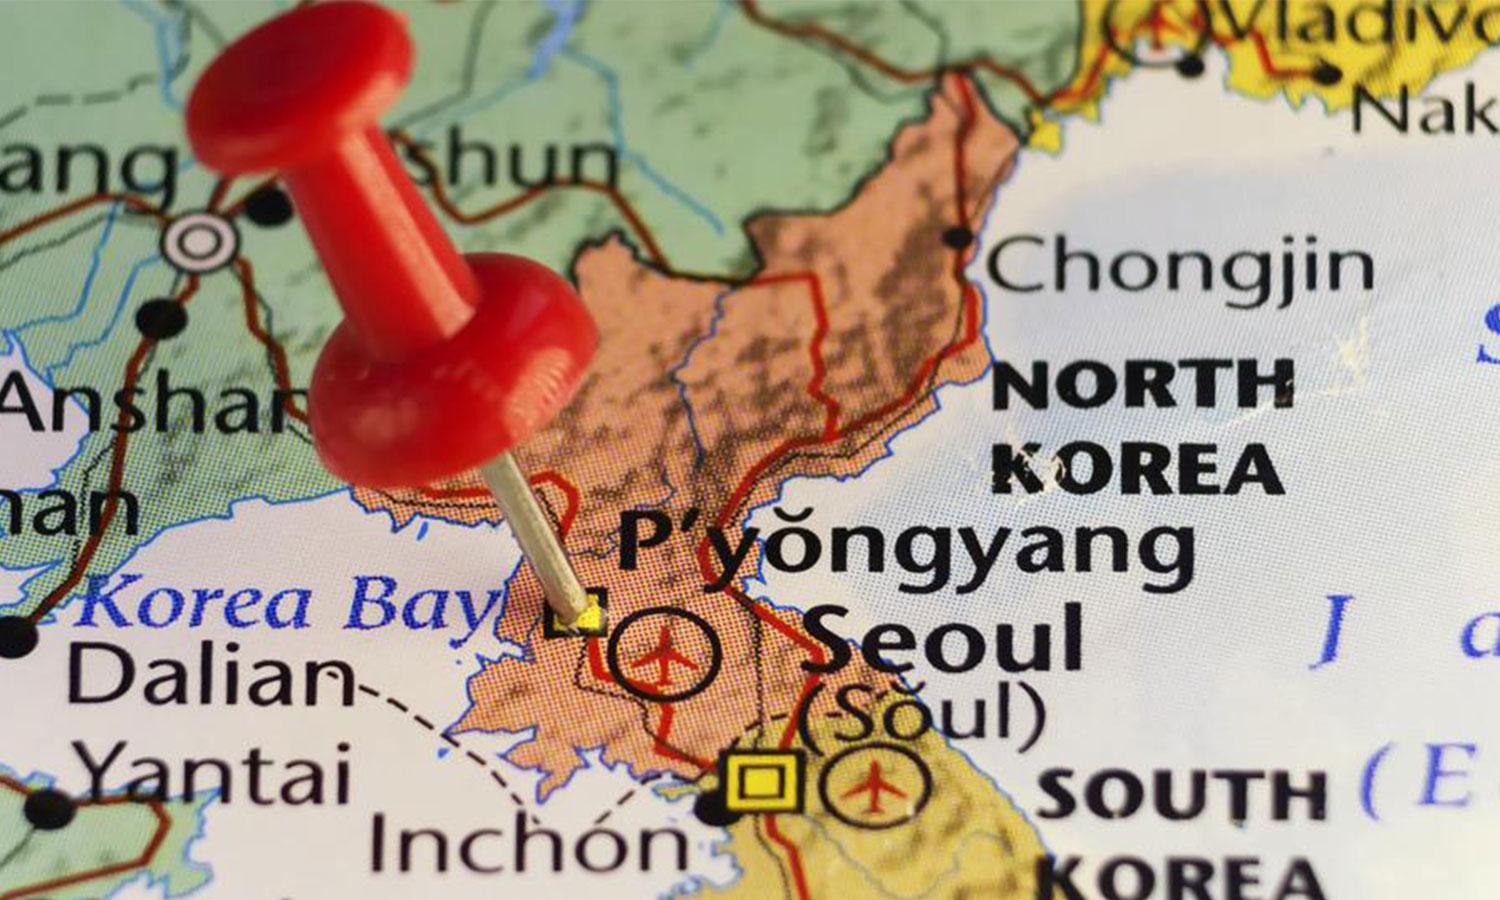 North Korea map with red push pin